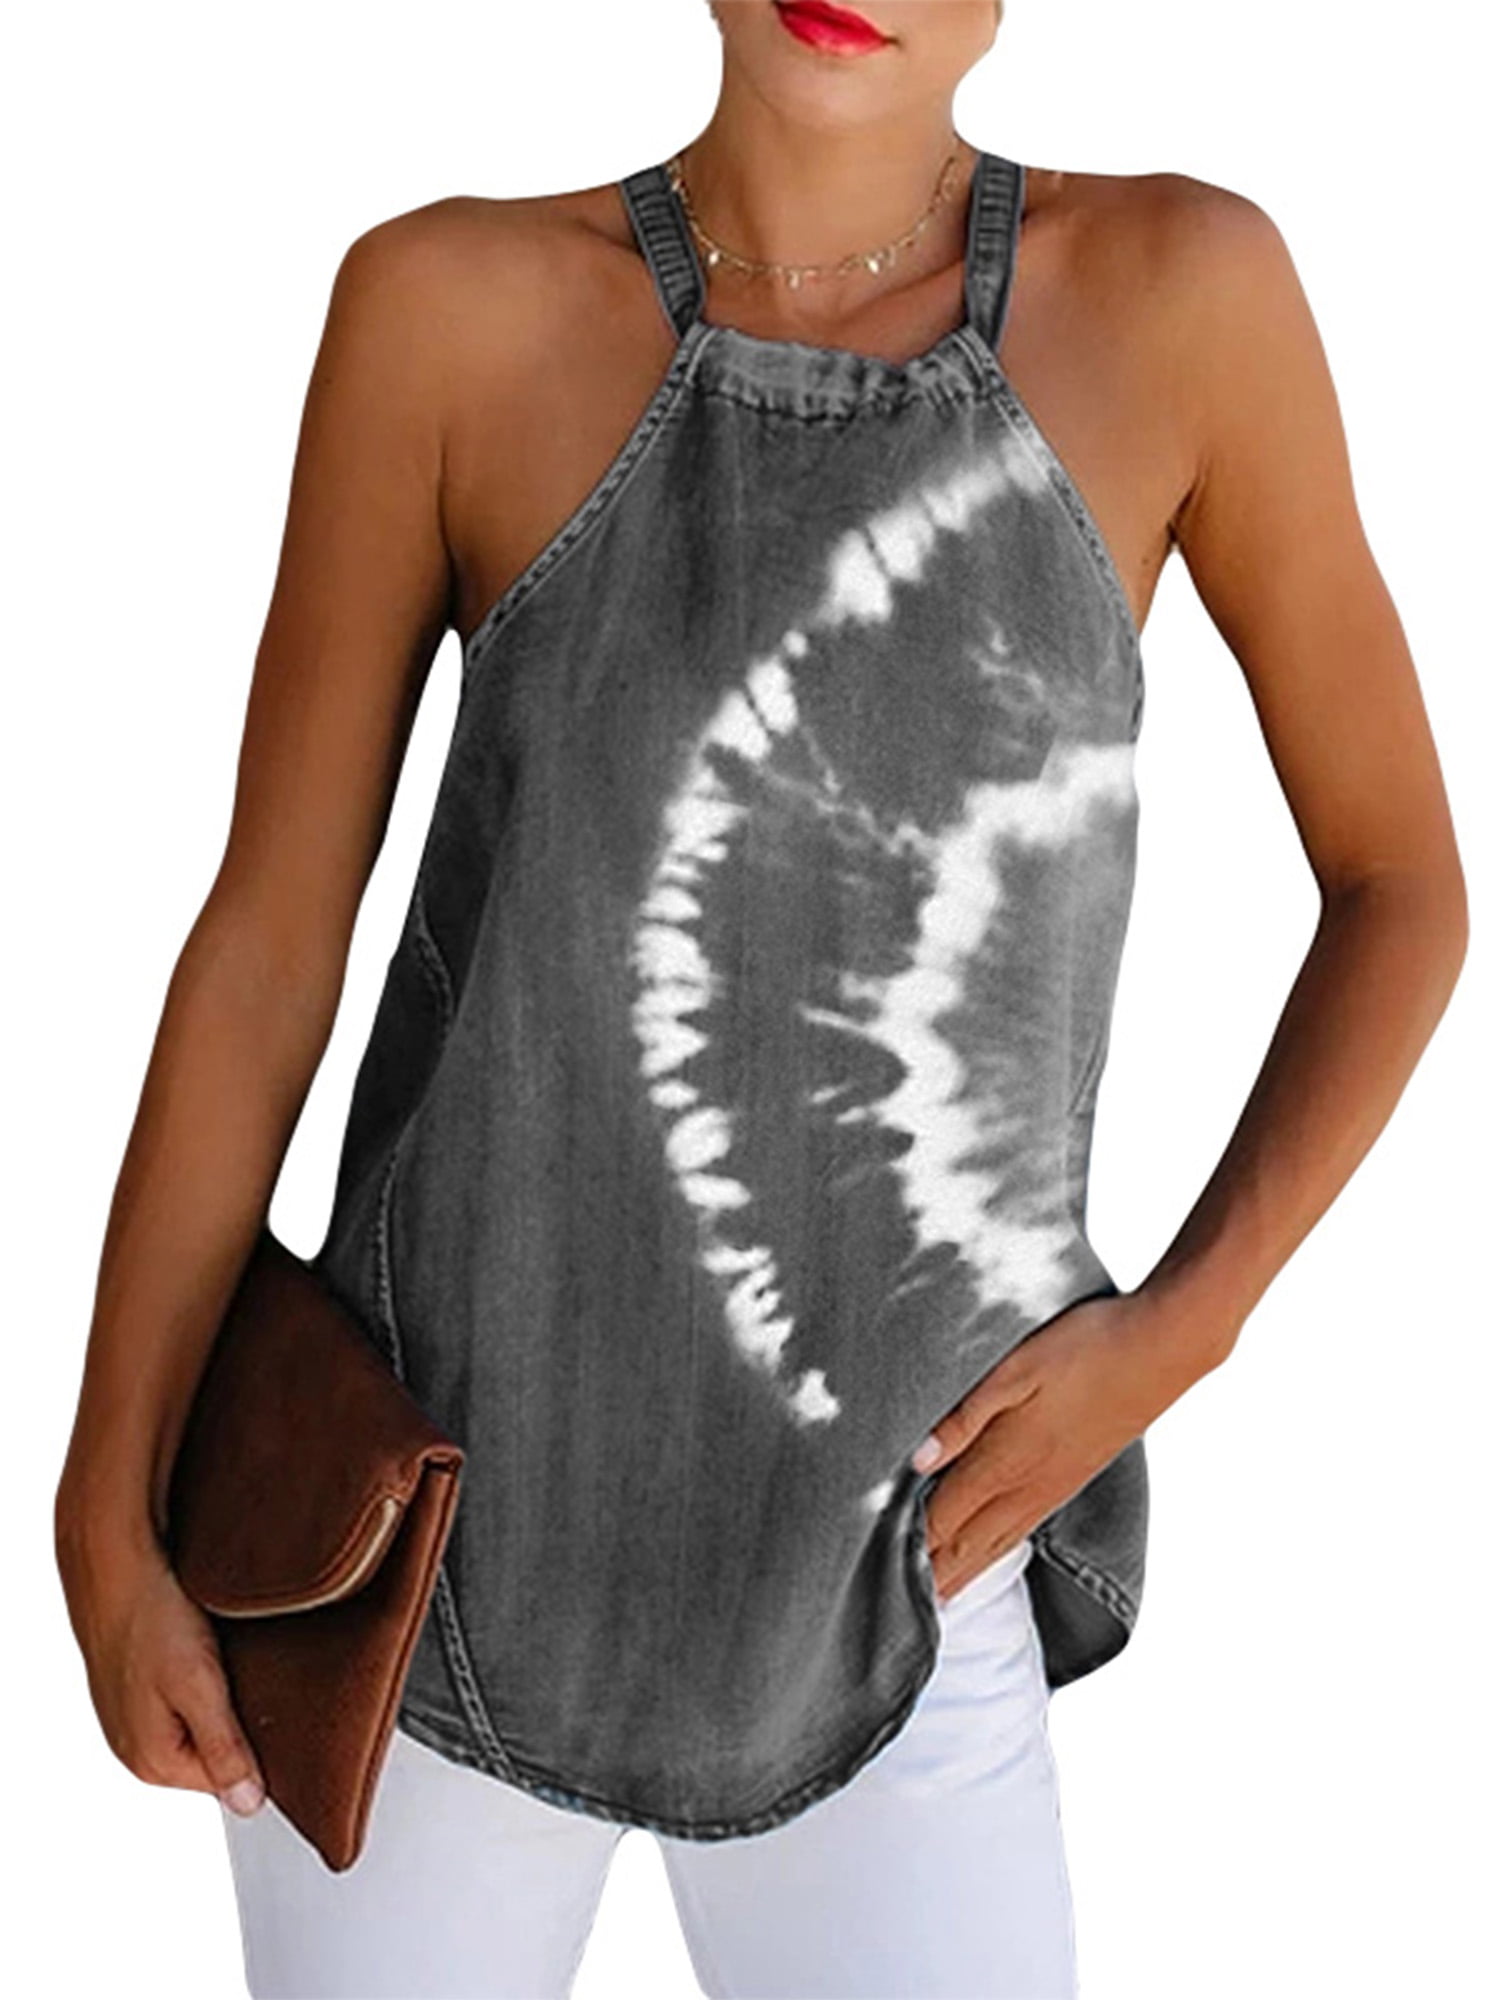 Tsmile Womens Gradient Color One Shoulder Sleeveless Vest Fashion Camisole Tie Dye Printed Cropped Tank Tops 